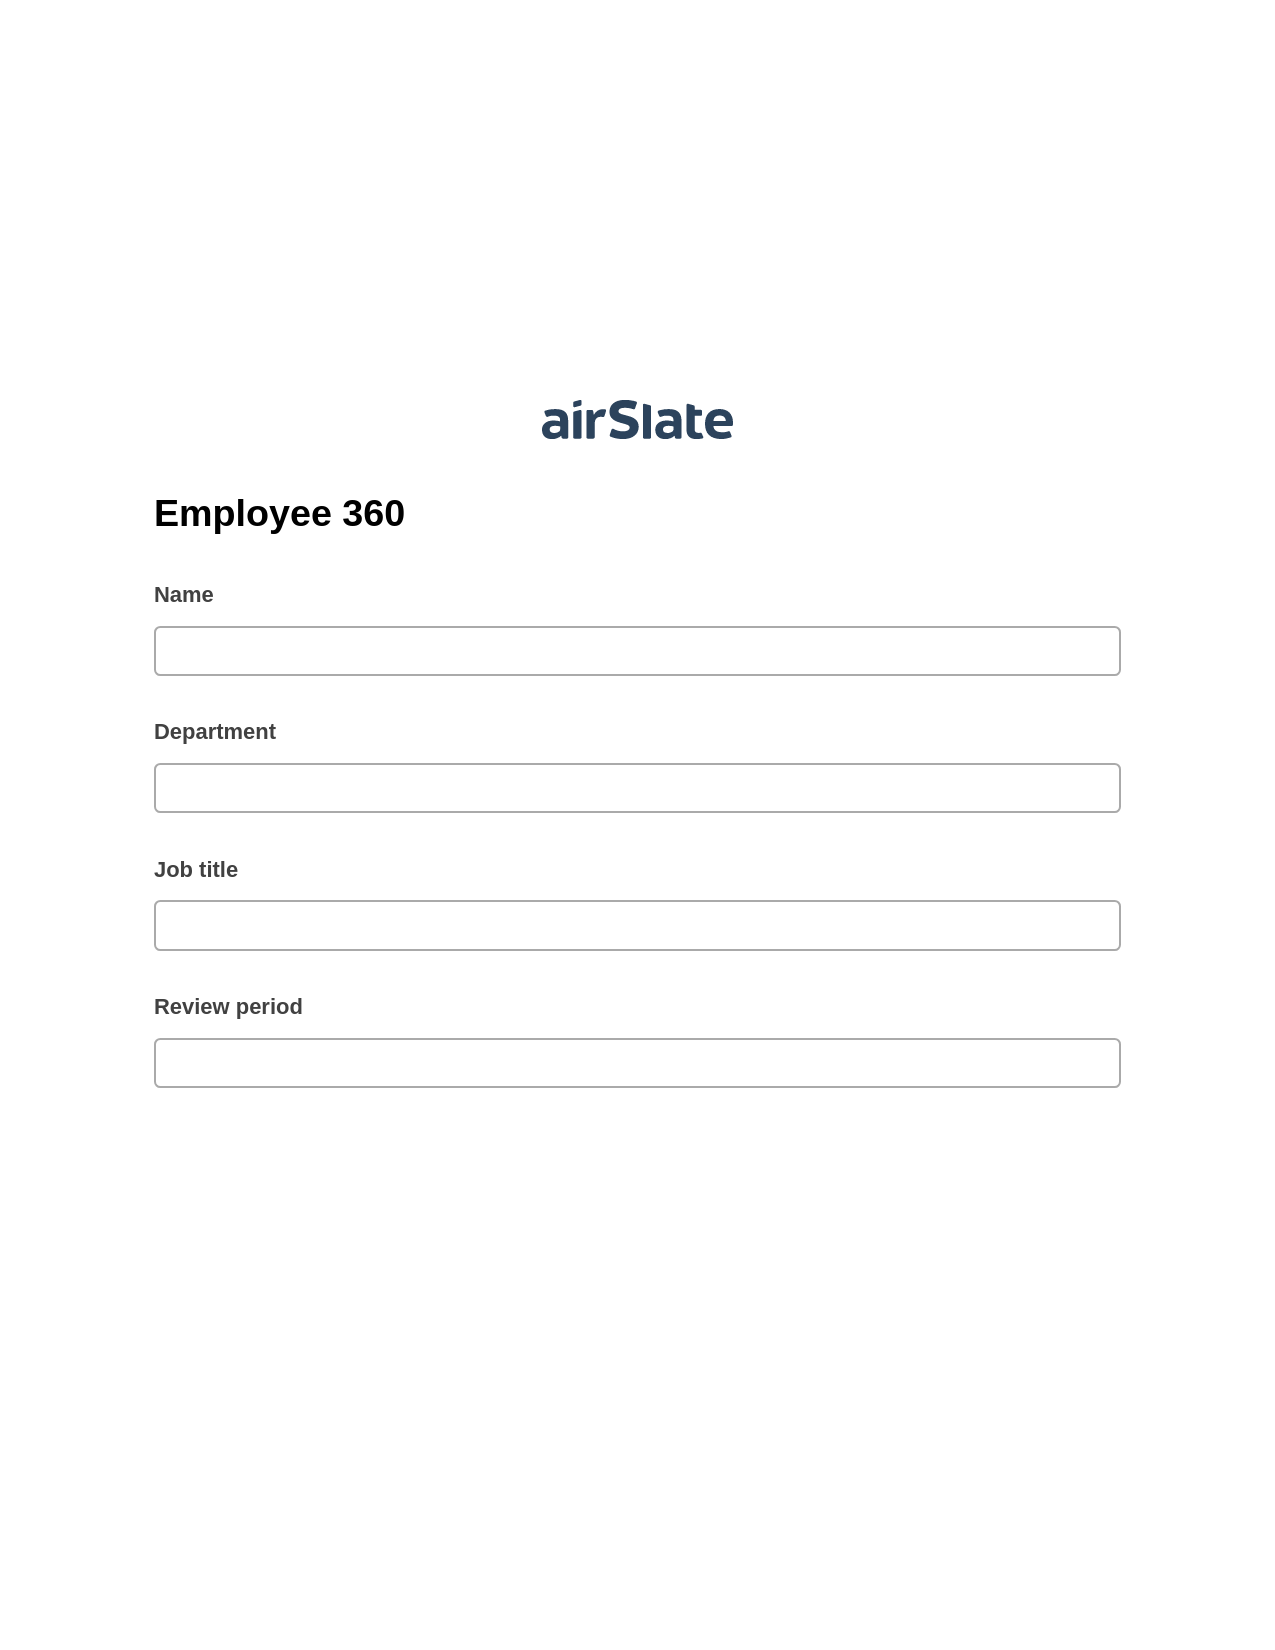 Multirole Employee 360 Pre-fill Dropdowns from CSV file Bot, Update MS Dynamics 365 Record Bot, Email Notification Postfinish Bot